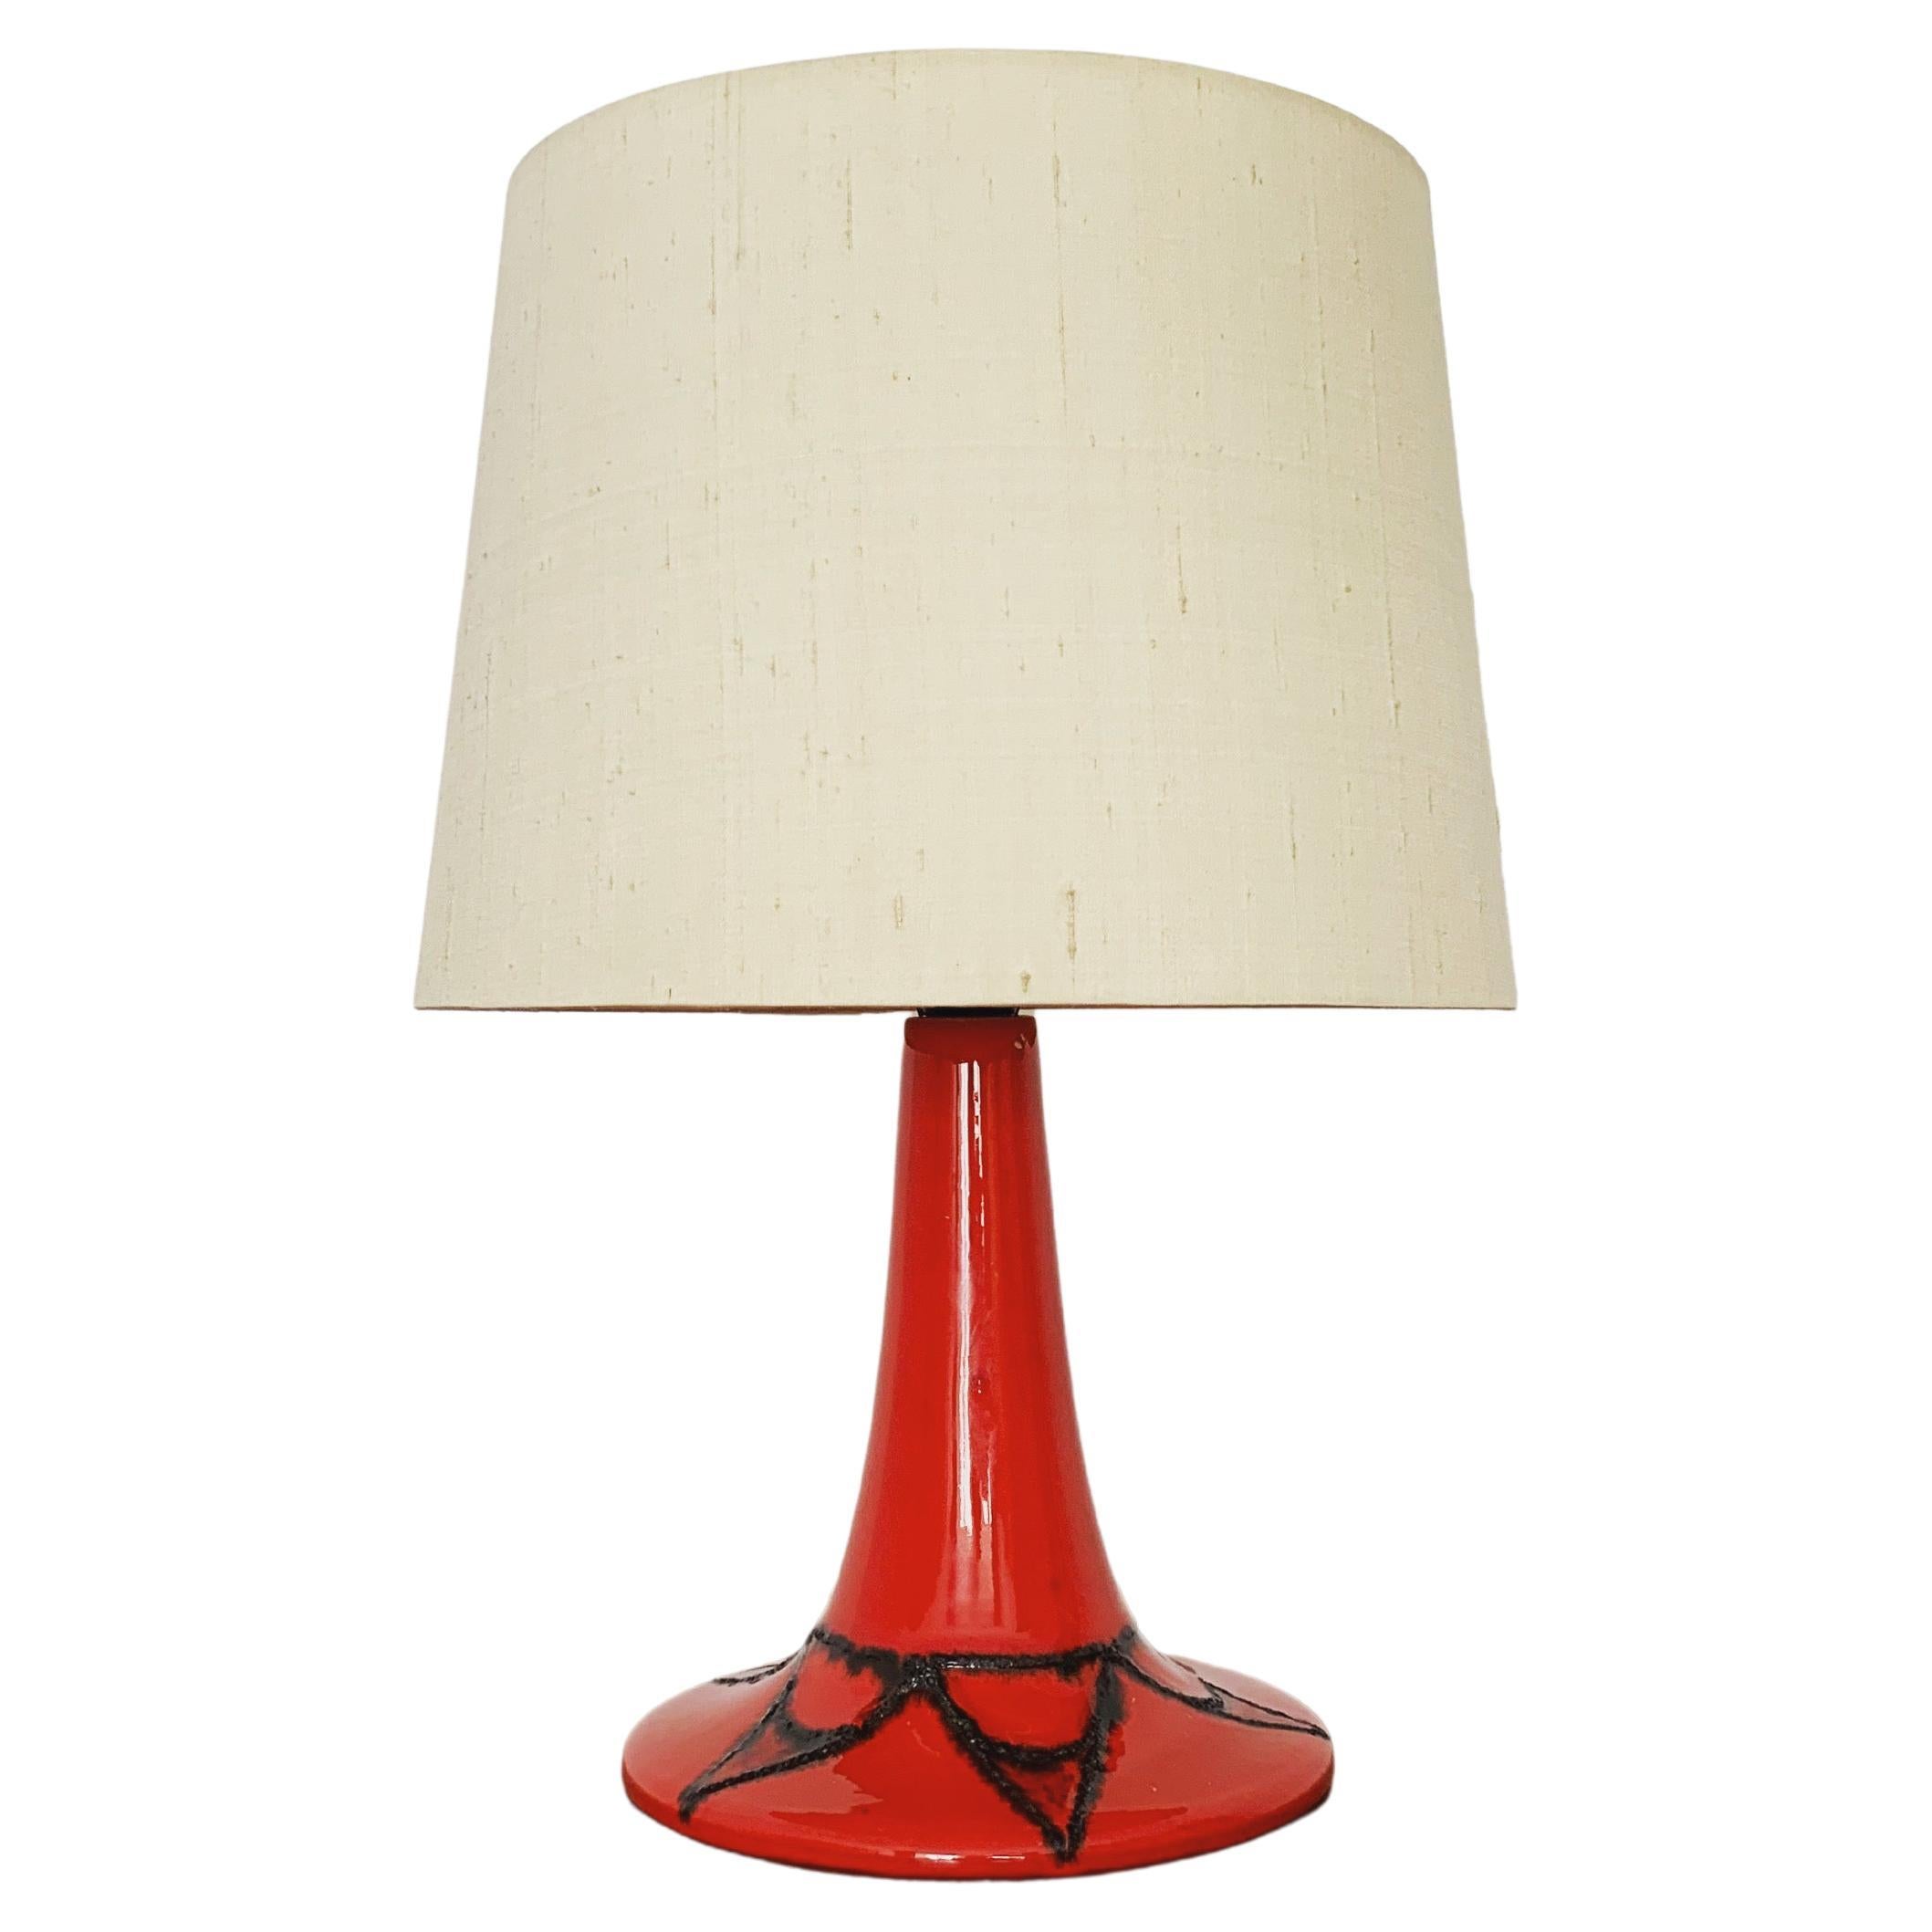 Ceramic Table Lamp For Sale